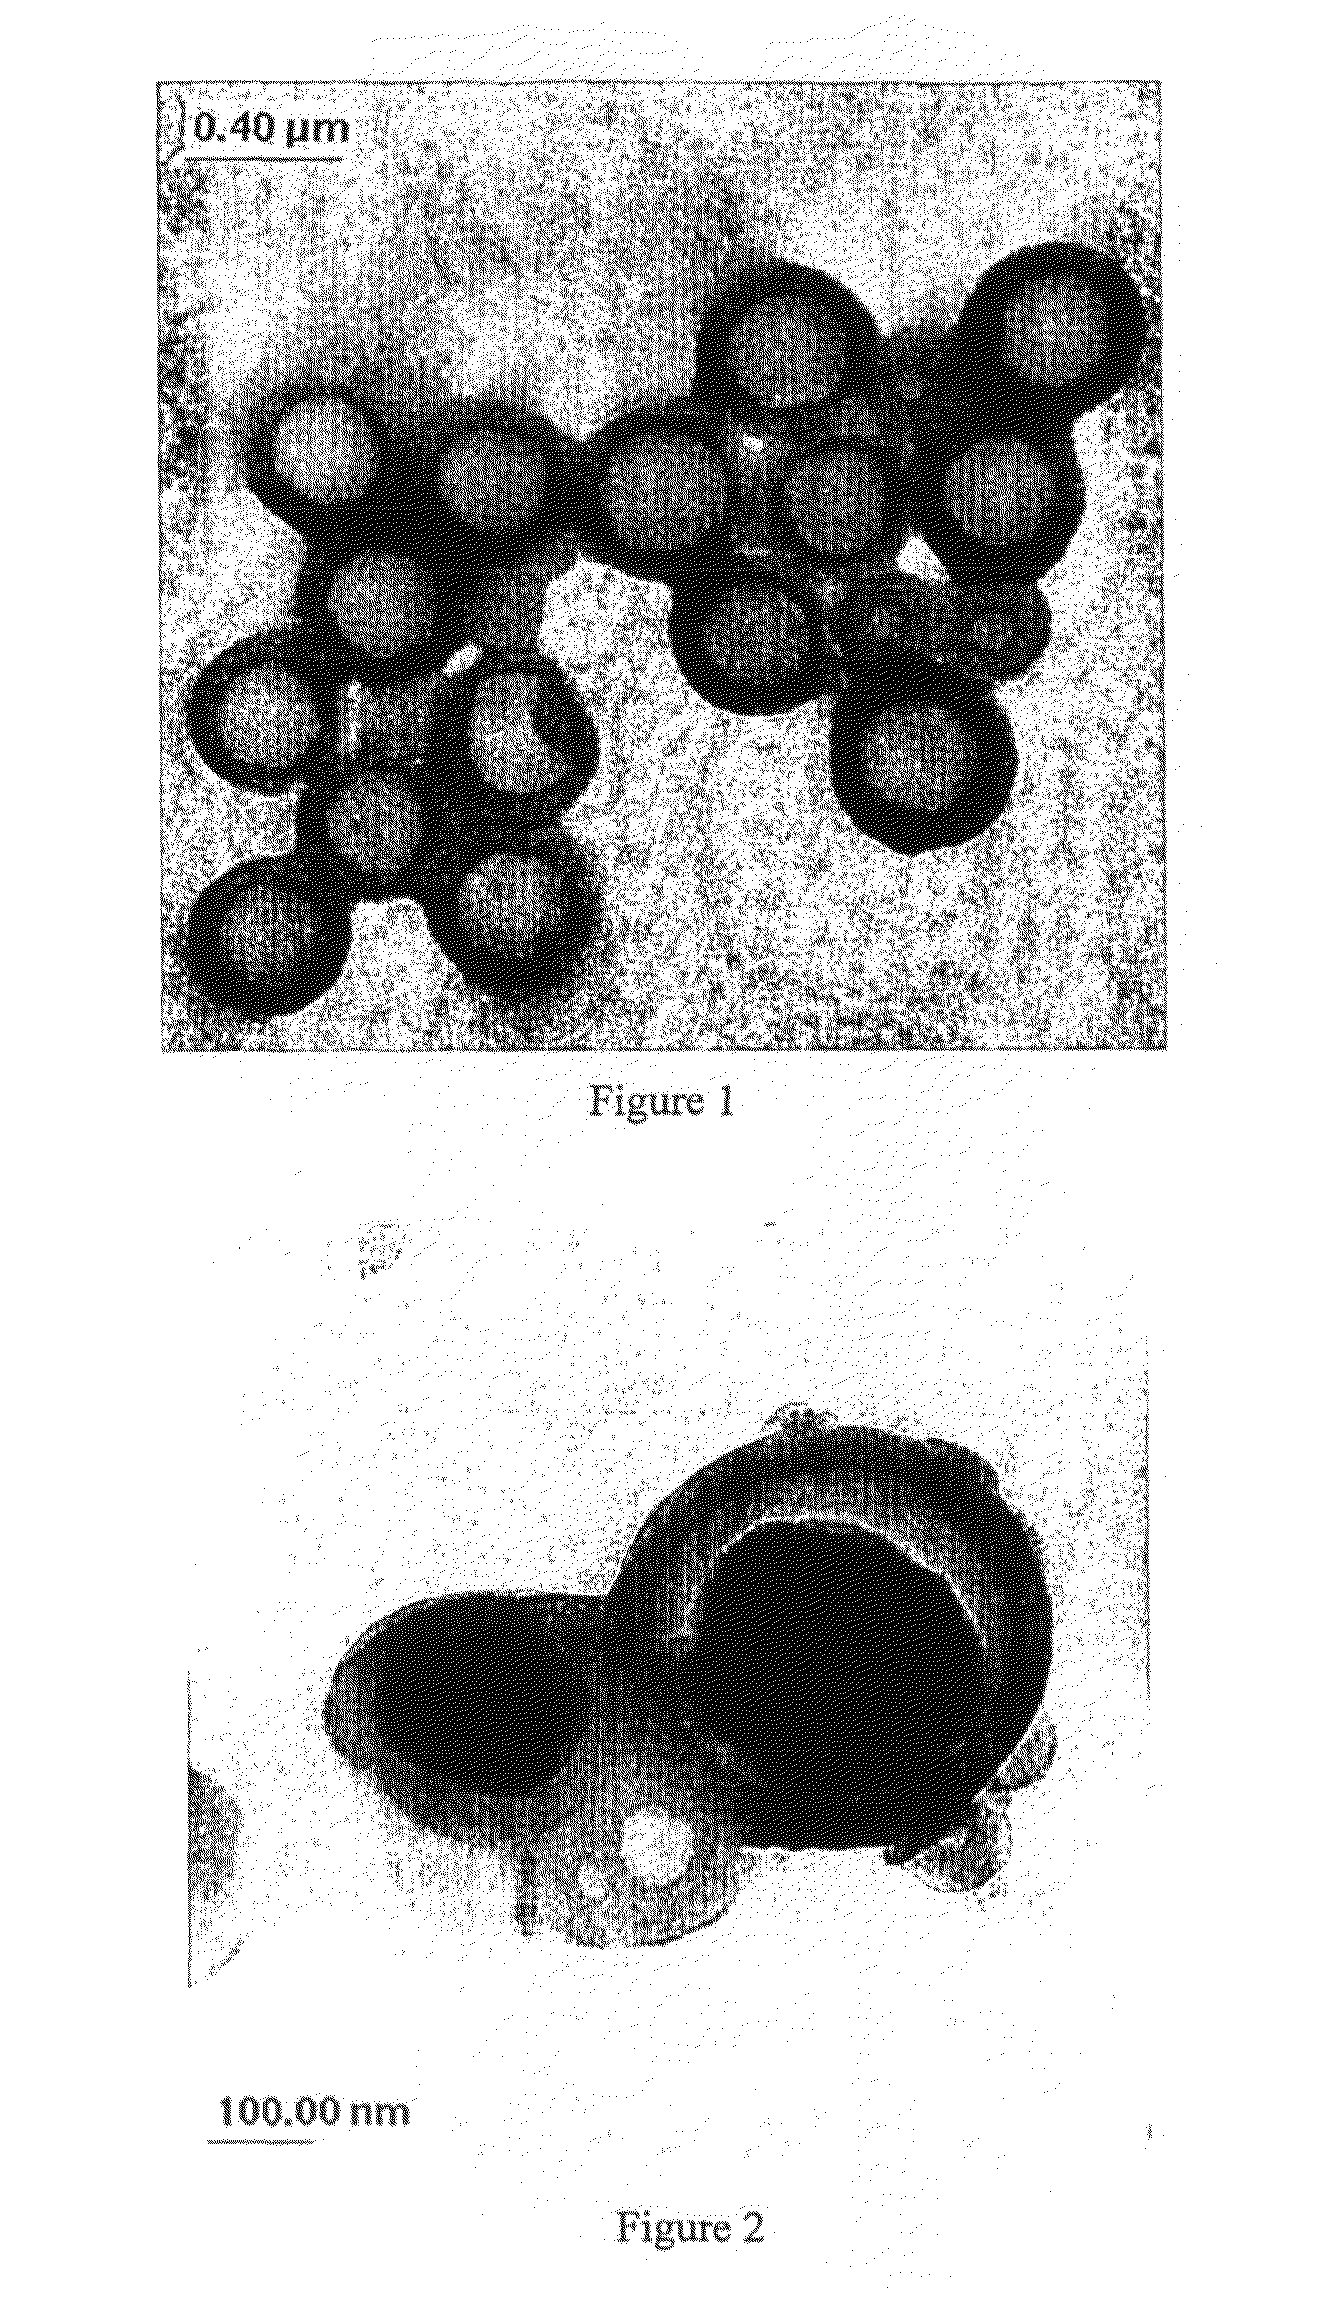 Vesiculated polymer particles